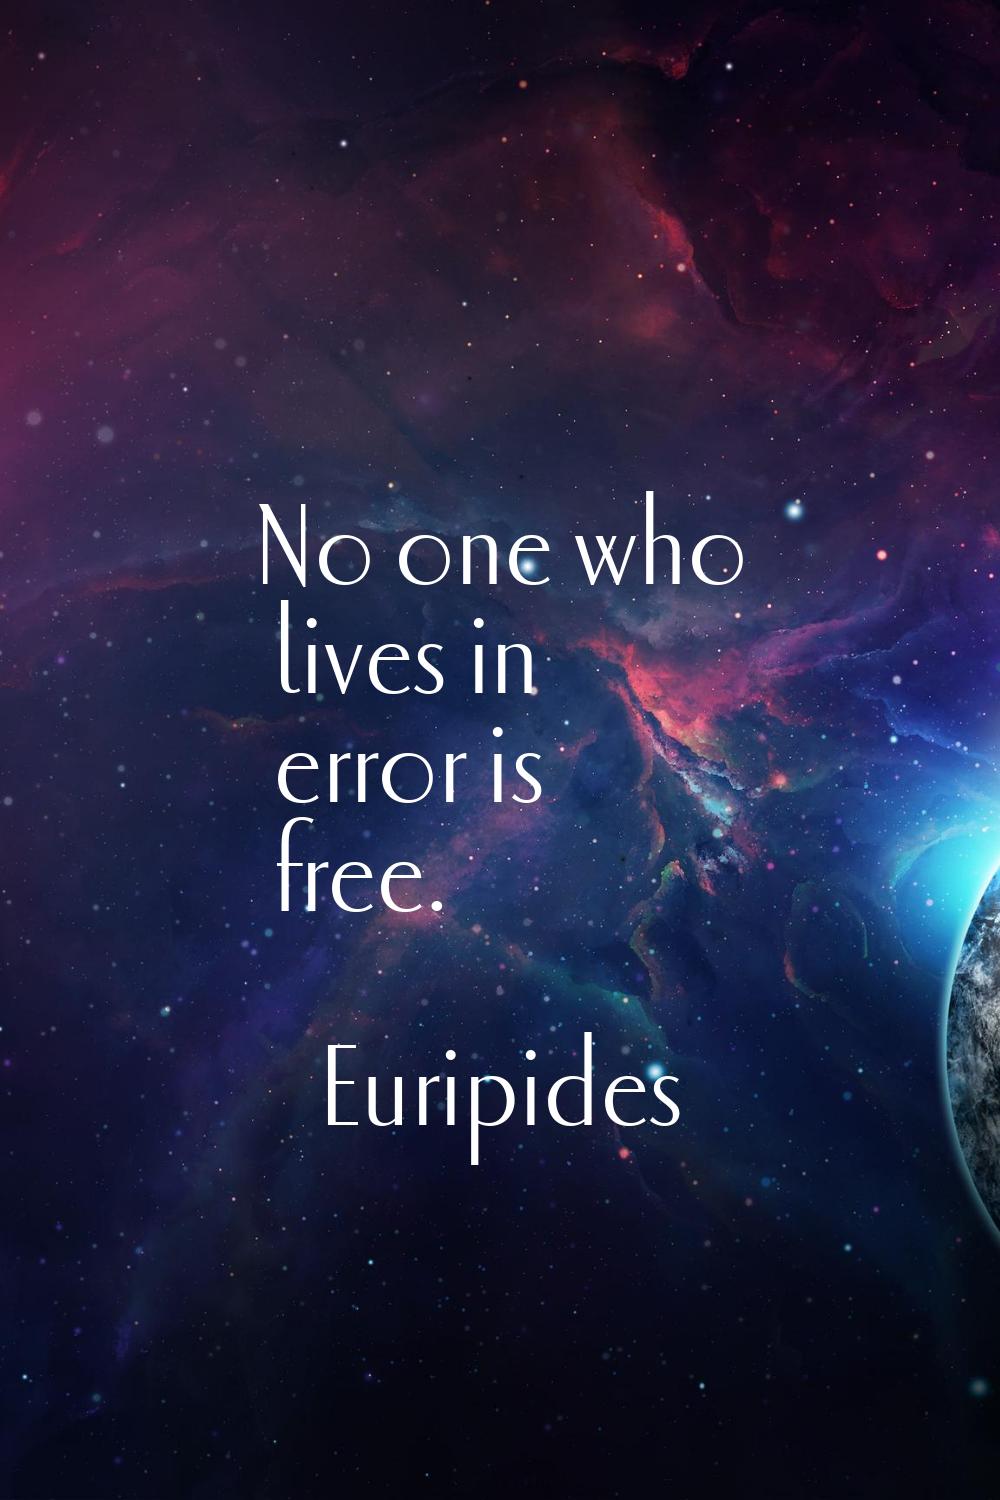 No one who lives in error is free.